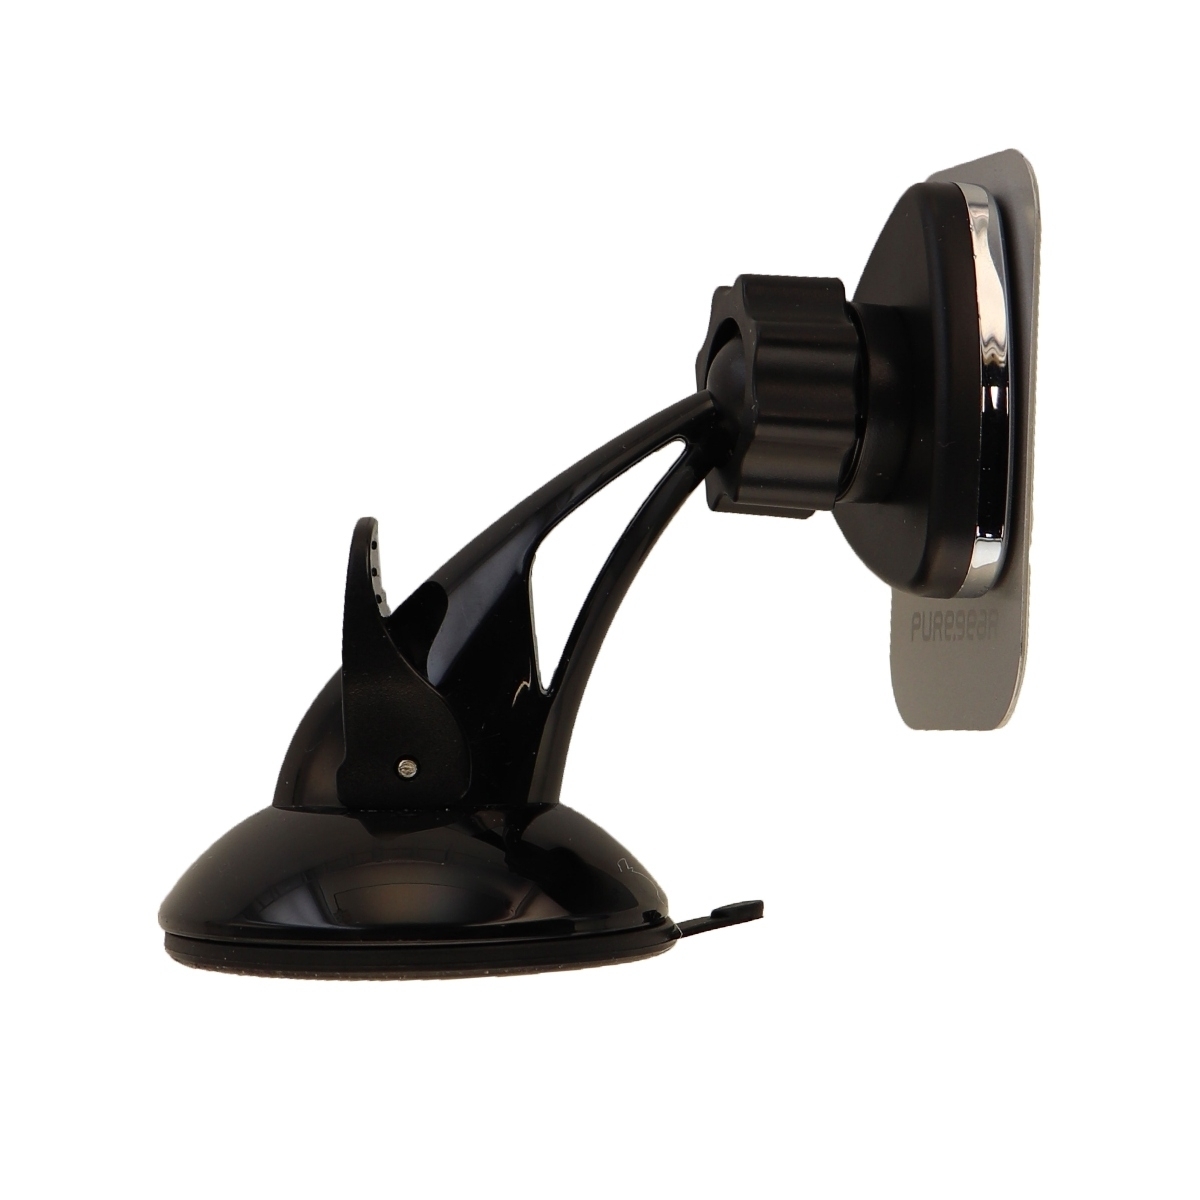 PureGear Magnetic Suction Cup Car Mount For Mobile Devices - Black